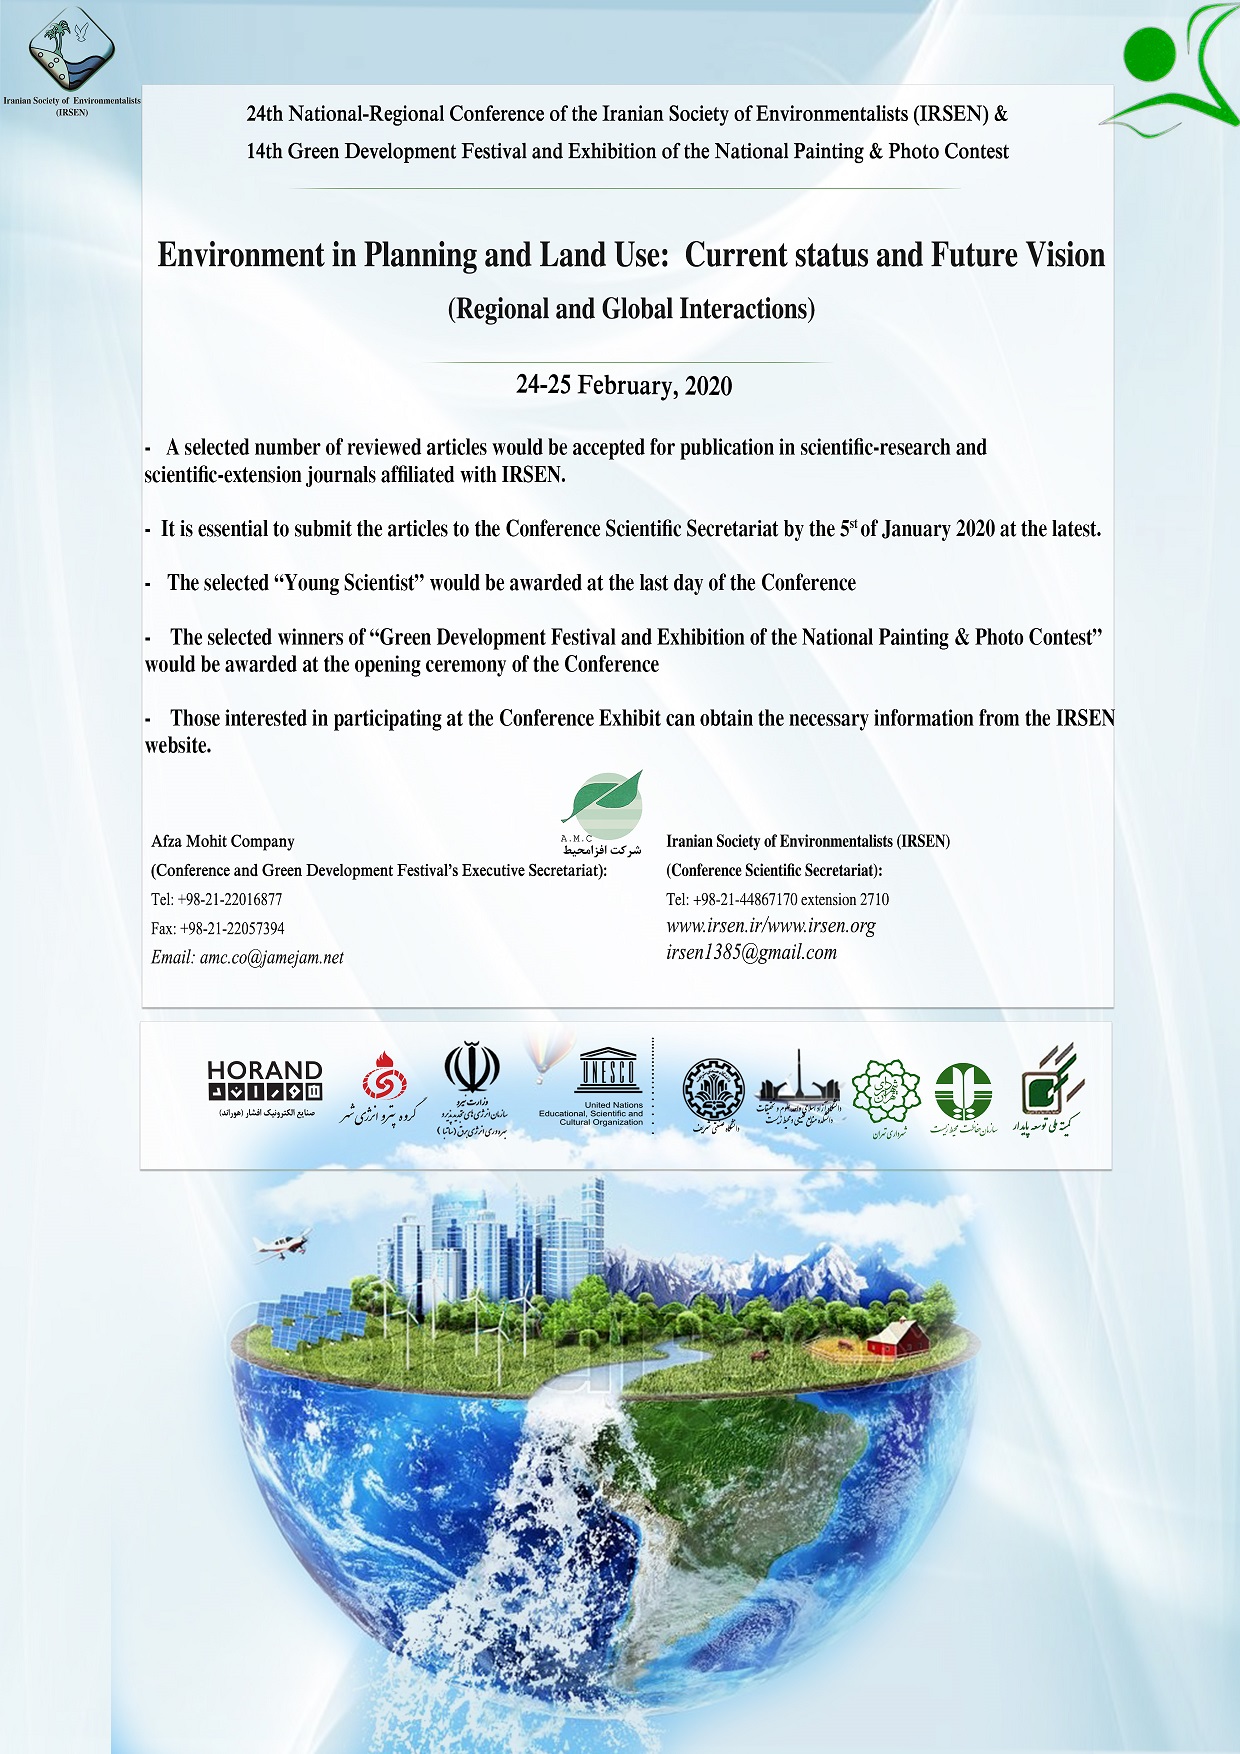 24th-national-regional-conference-of-the-iranian-society-of-environmentalists-irsen-and-14th-green-development-festival-and-exhibition-of-the-national-painting-and-photo-contest-environment-in-planning-and-land-use-current-status-and-future-vision-regiona